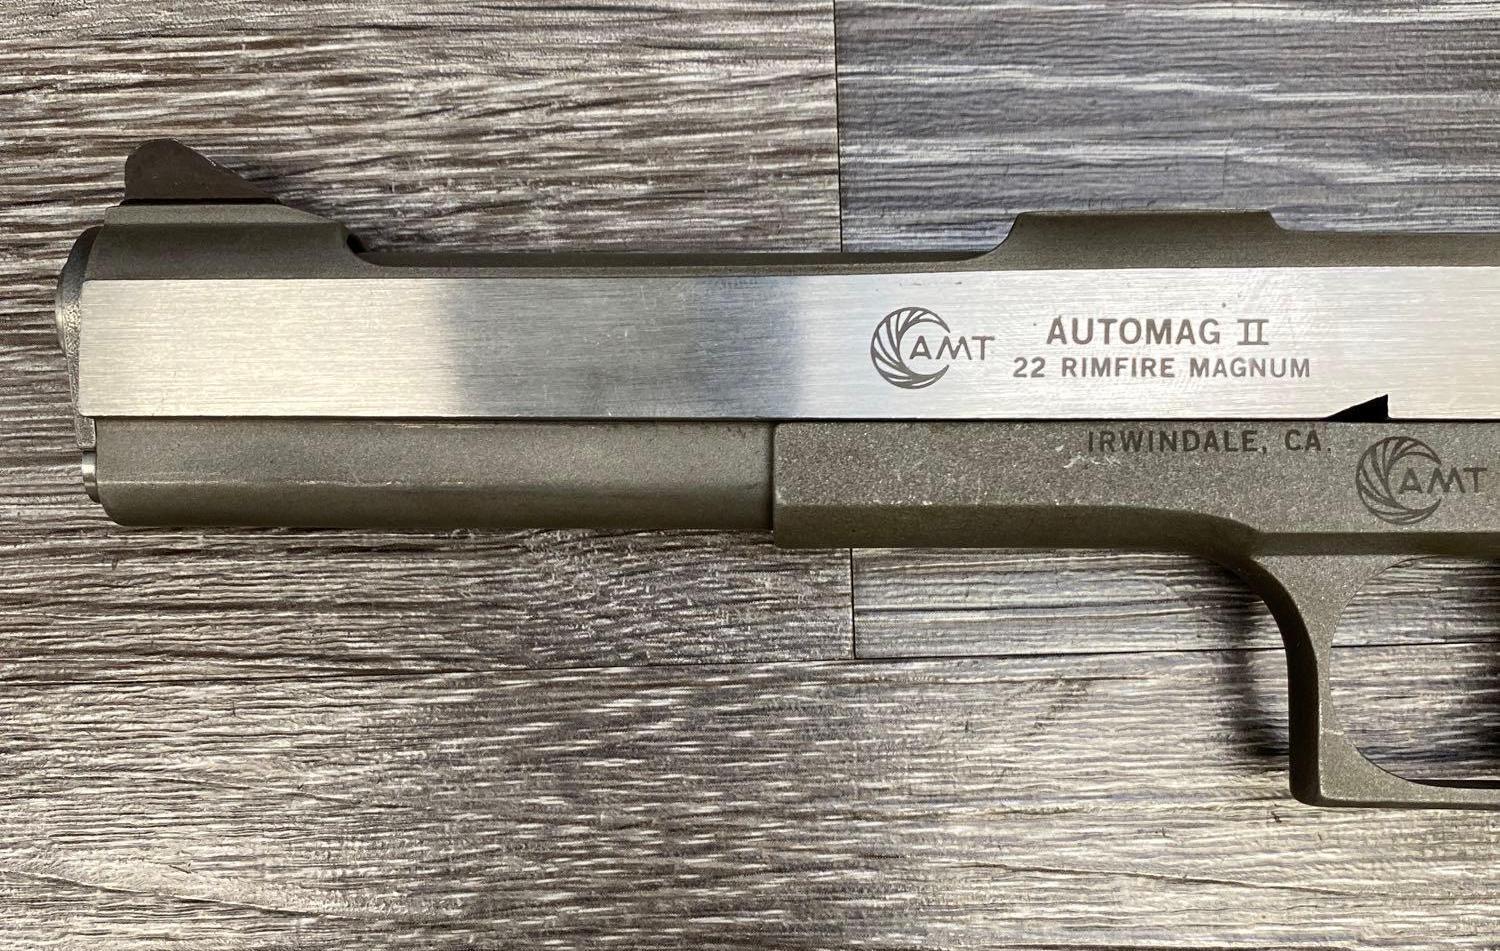 AMT AUTOMAG II STAINLESS STEEL .22 MAGNUM CAL. SEMI-AUTO PISTOL W/ BOX